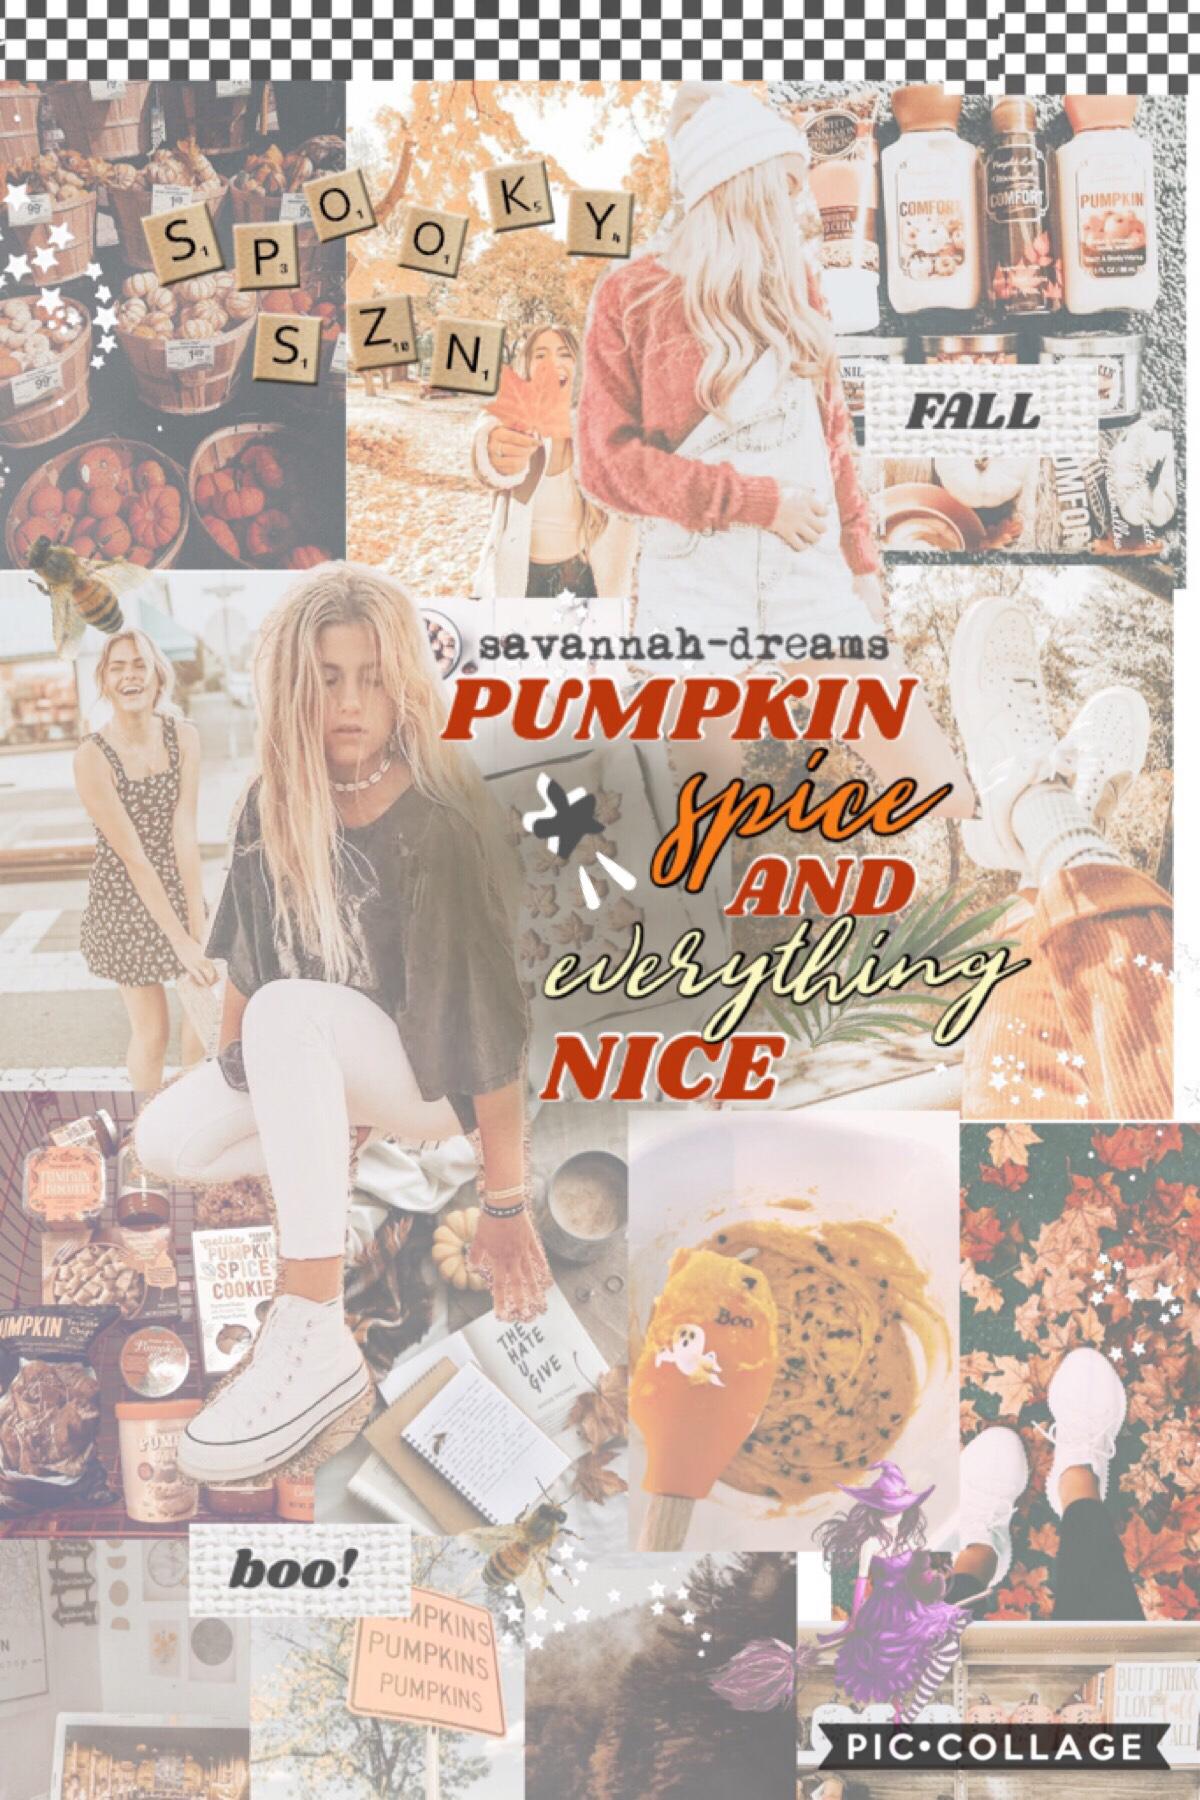 fall/halloween themed games entry 🐆🍂 inspired by enya's (@meandmeonly) latest post 🌾🐿 eee i actually really like this!! ✌🏼 what do y'all think?? ⚡️🍁